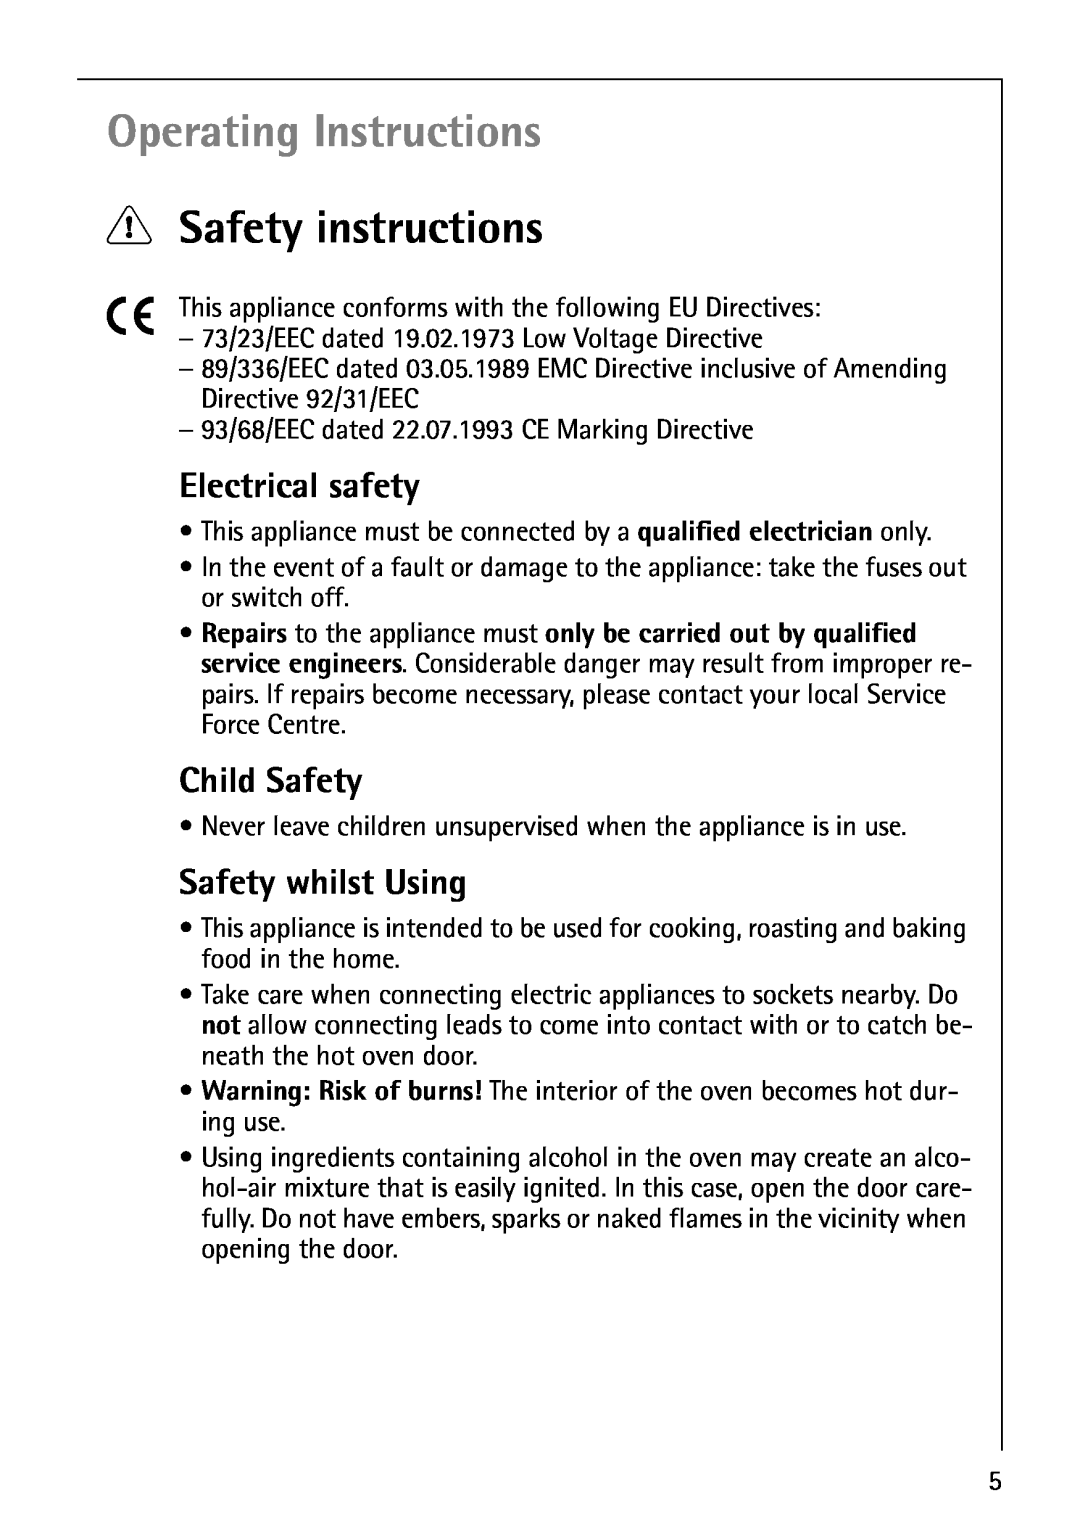 Electrolux B8871-4 manual Operating Instructions, Safety instructions, Electrical safety, Child Safety, Safety whilst Using 